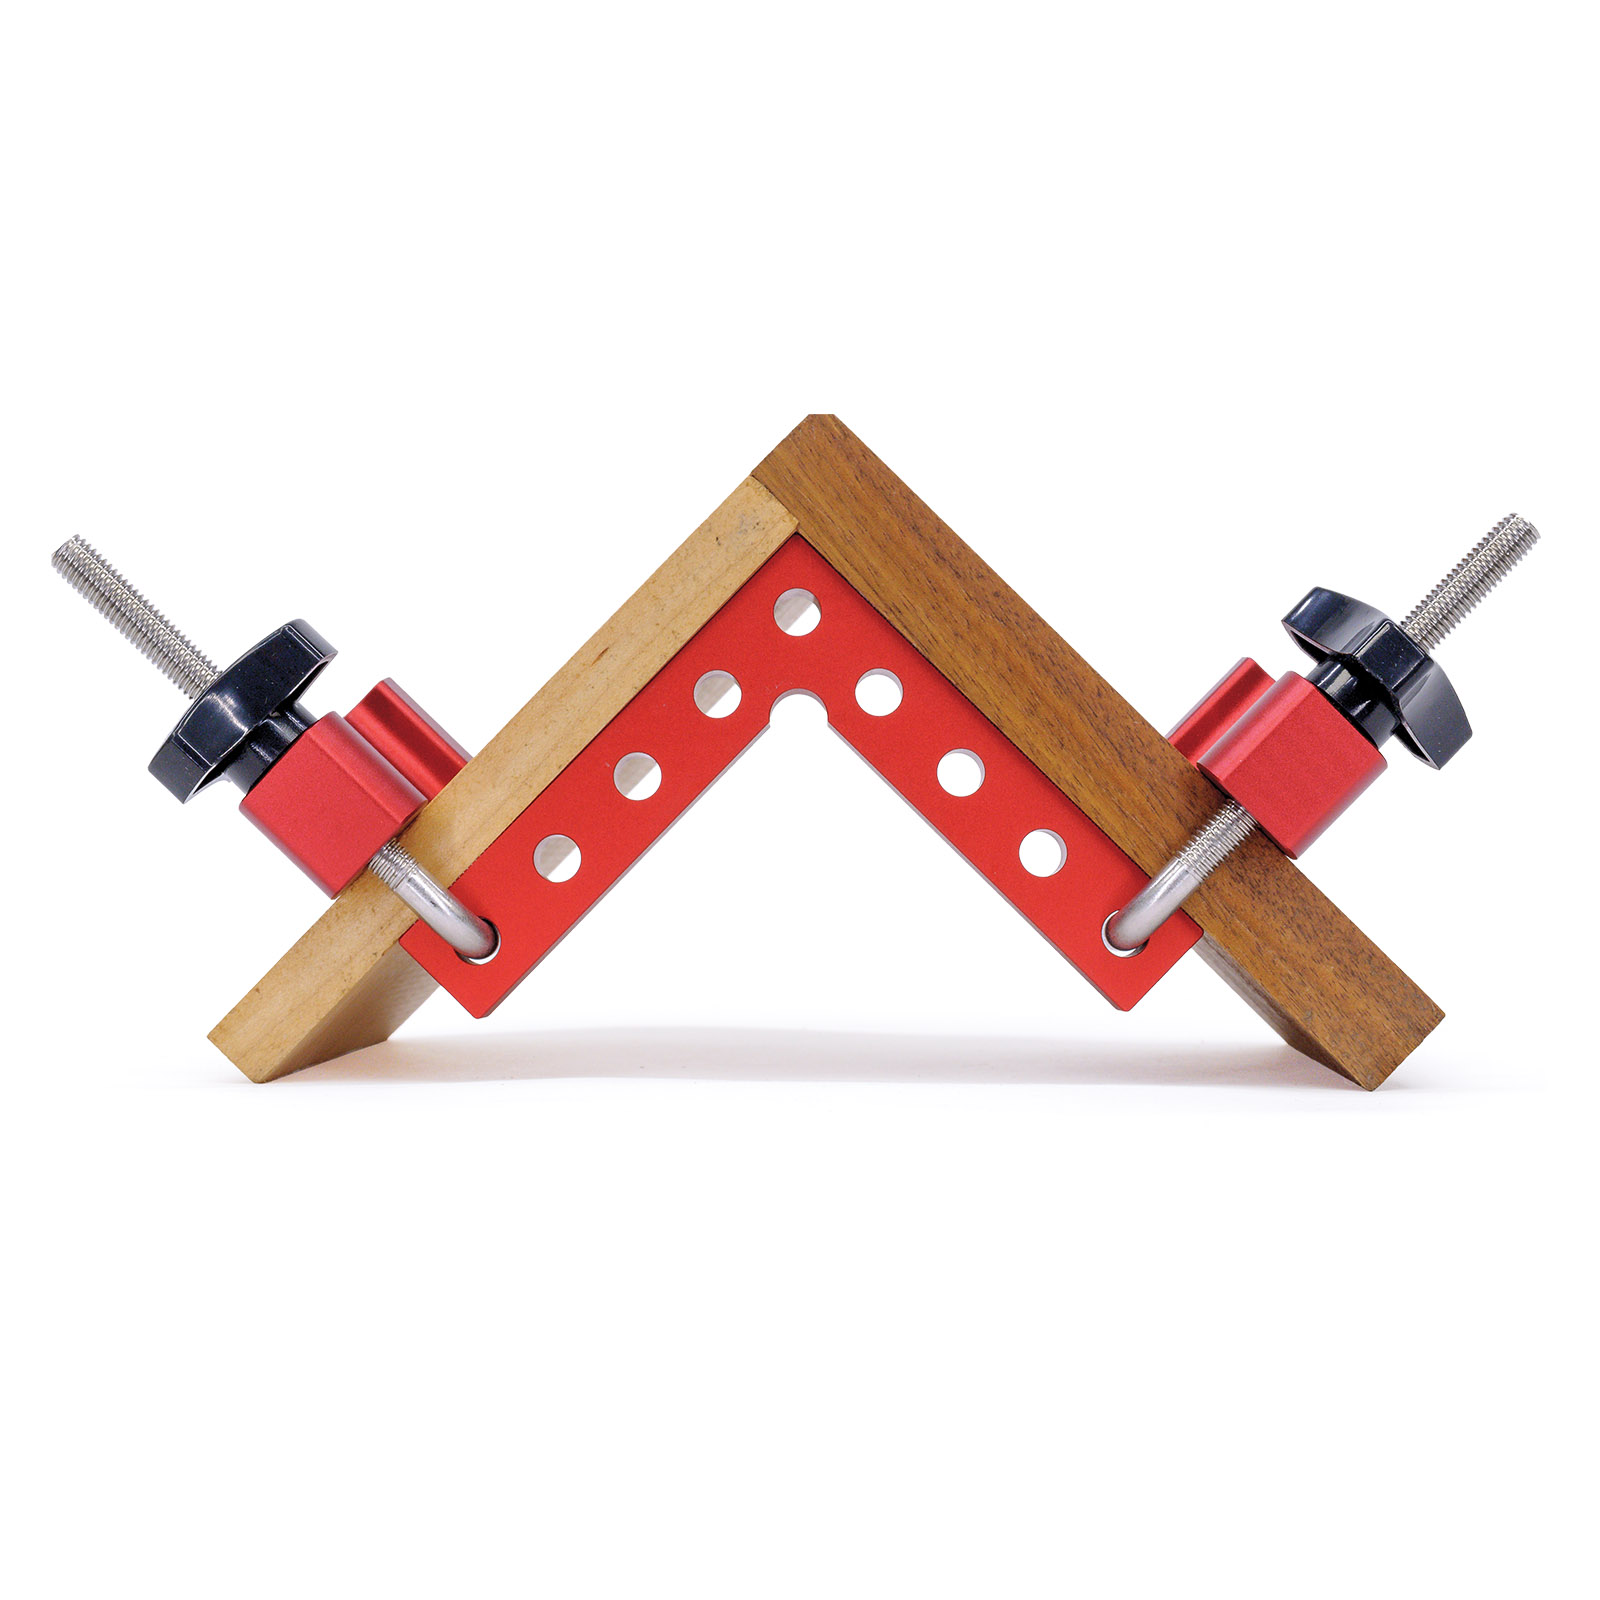 90 Degree Corner Clamps (Set of 2 Clamps)